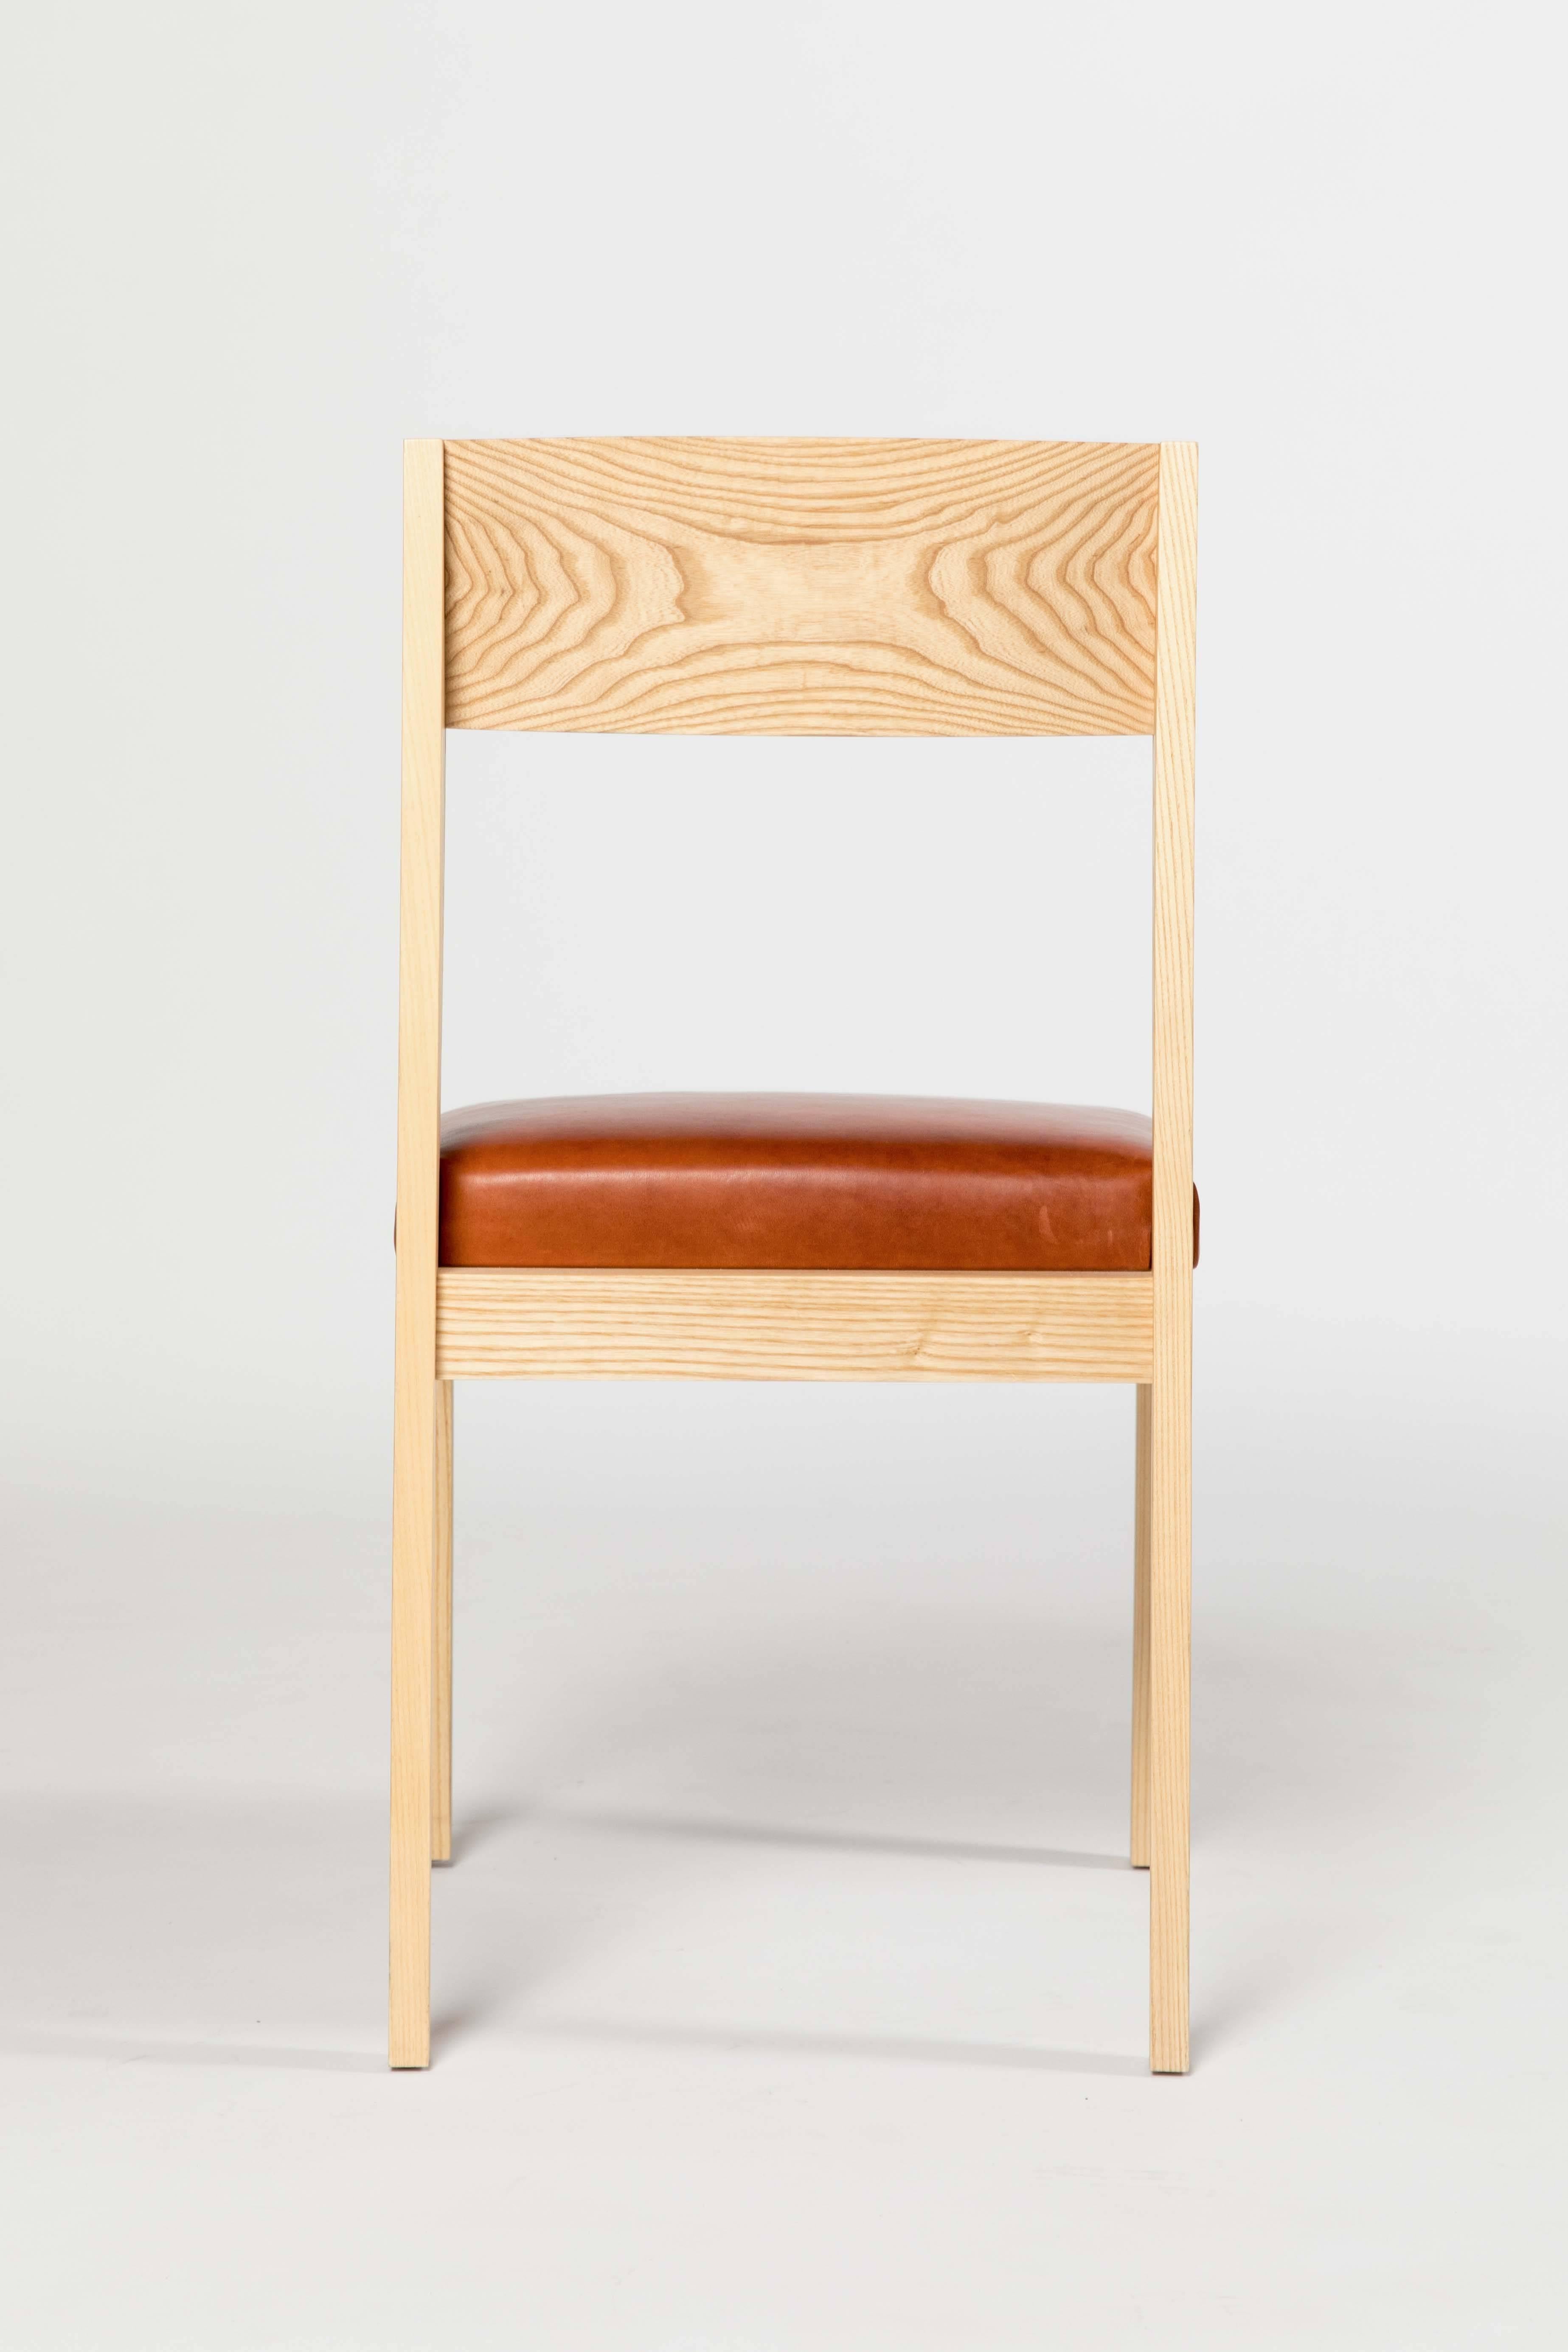 The Shelley chair by Kate Duncan is handcrafted from solid wood. It incorporates clean lines and intersecting angles to maximize comfort. This dining chair features a sloped curved back that cradles resting shoulders and a leather seat with